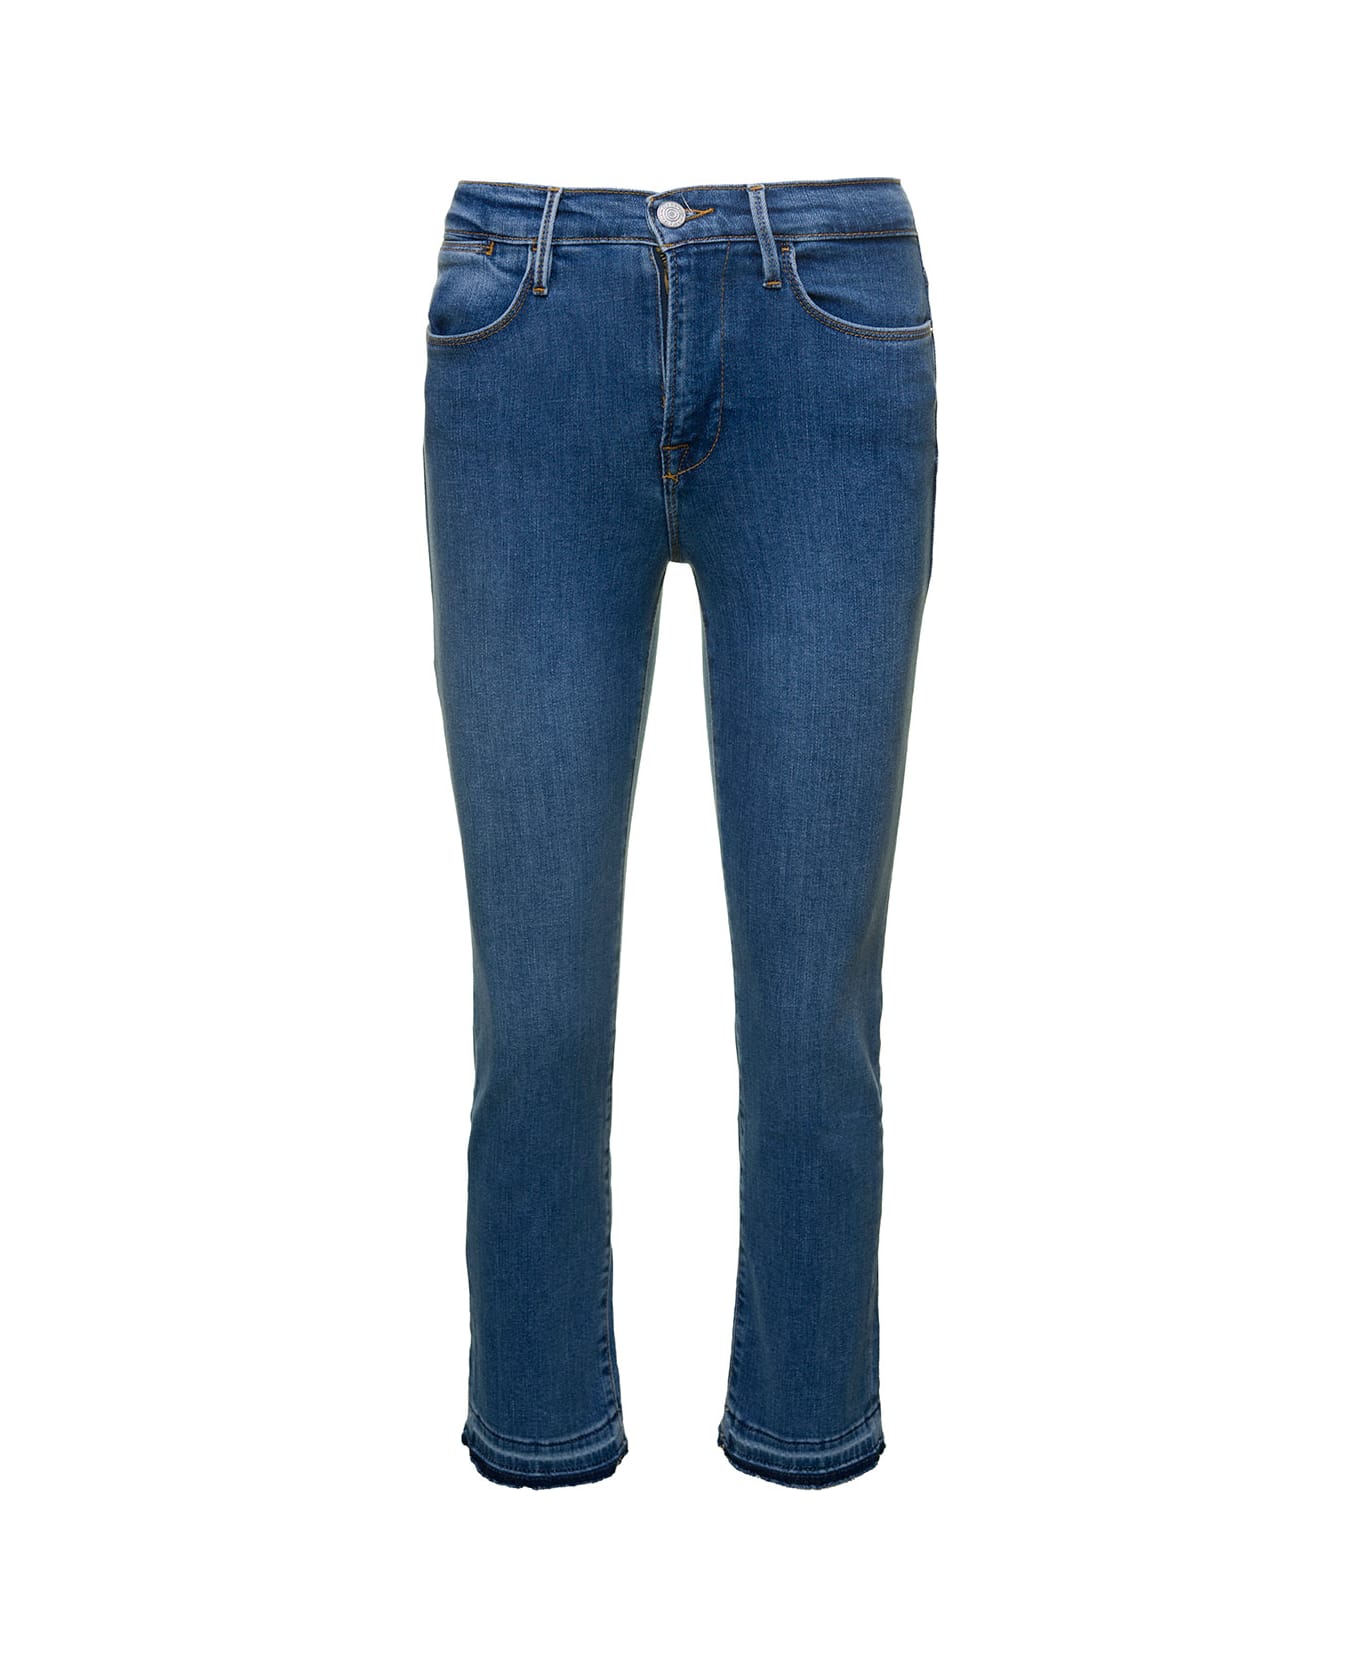 Frame 'le High Straight' Blue Five-pocket Style Jeans In Cotton Blend Denim Woman - Blu